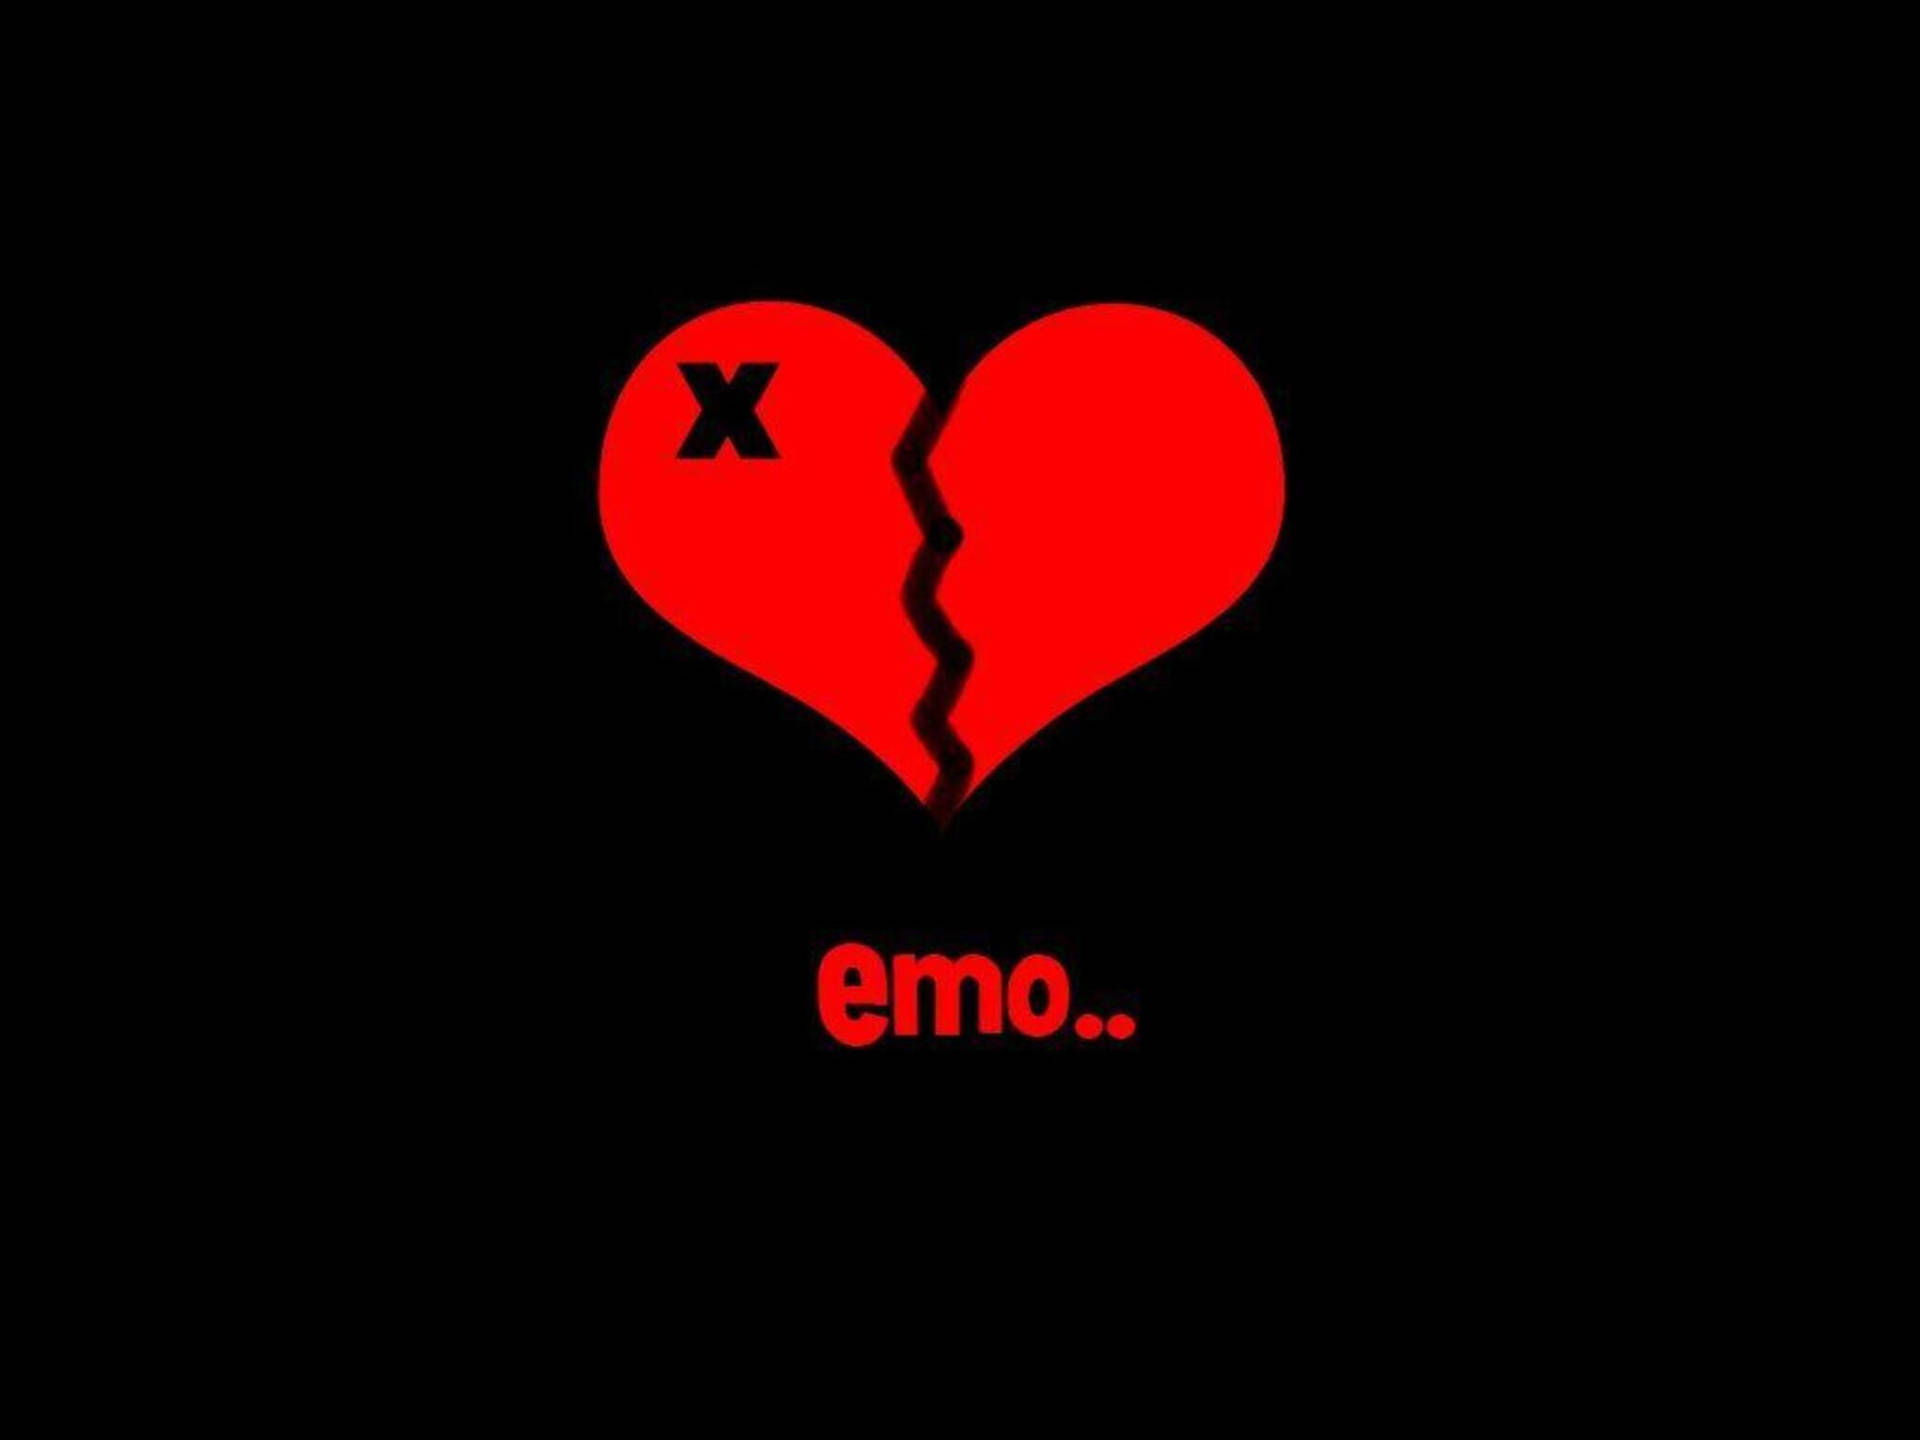 Free Emo Wallpaper Downloads, [100+] Emo Wallpapers for FREE | Wallpapers .com